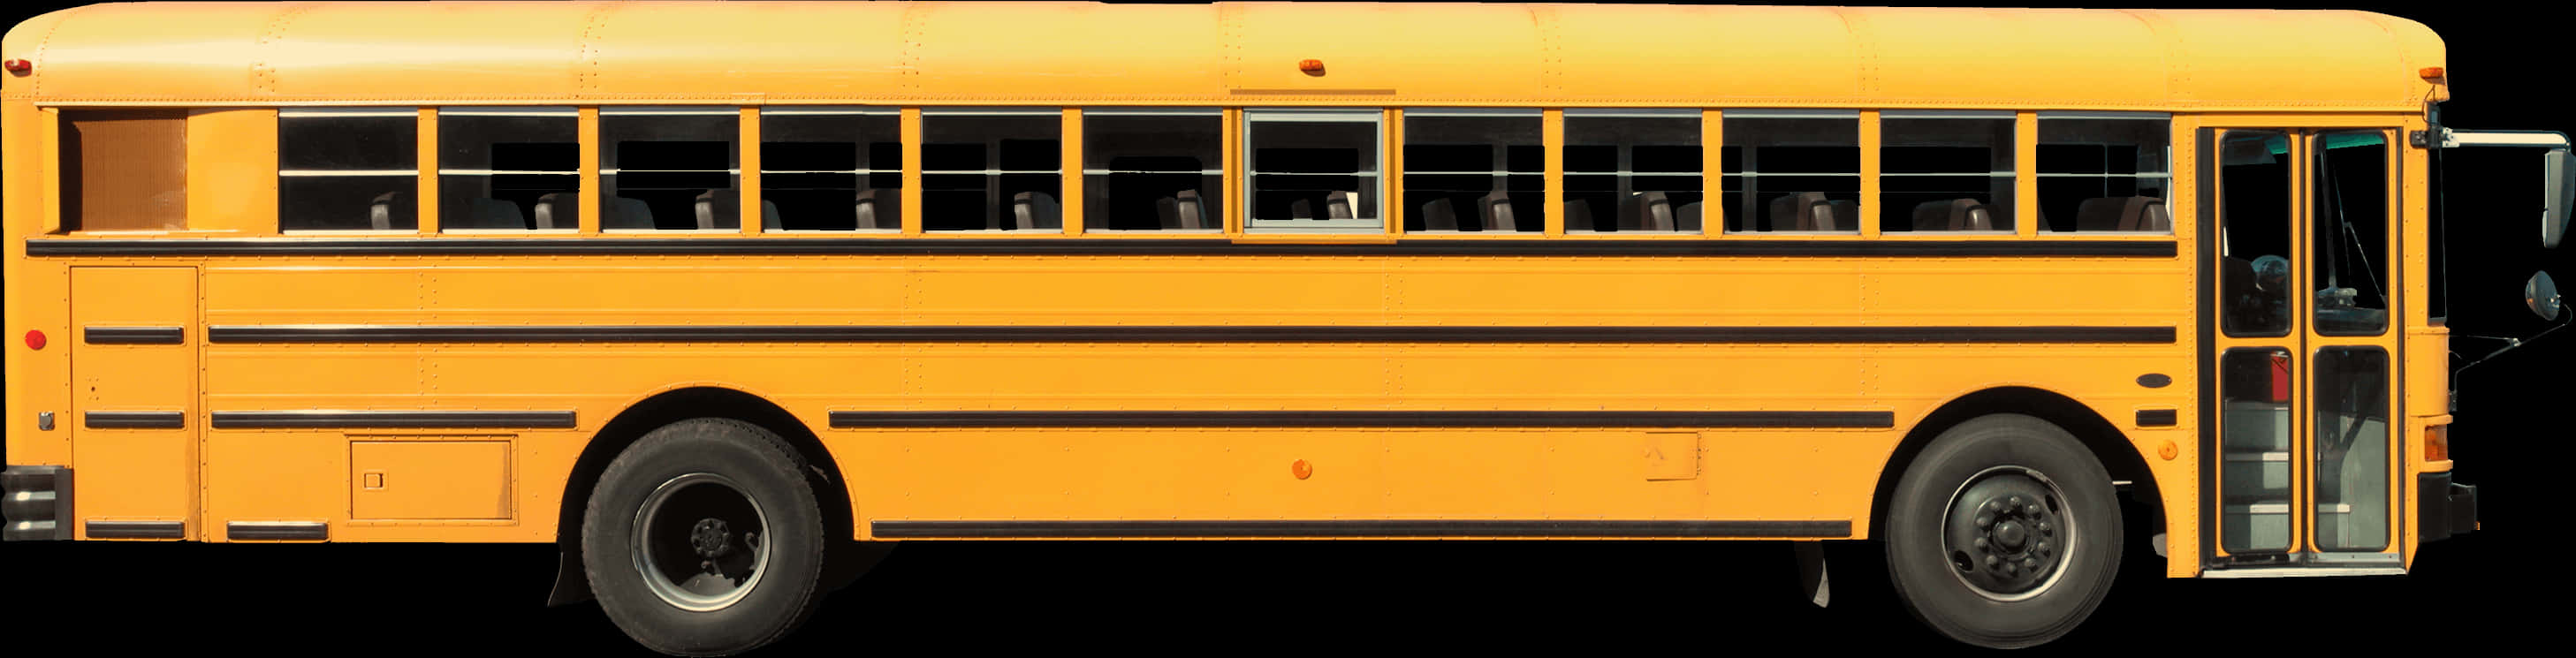 A Close-up Of A Yellow School Bus